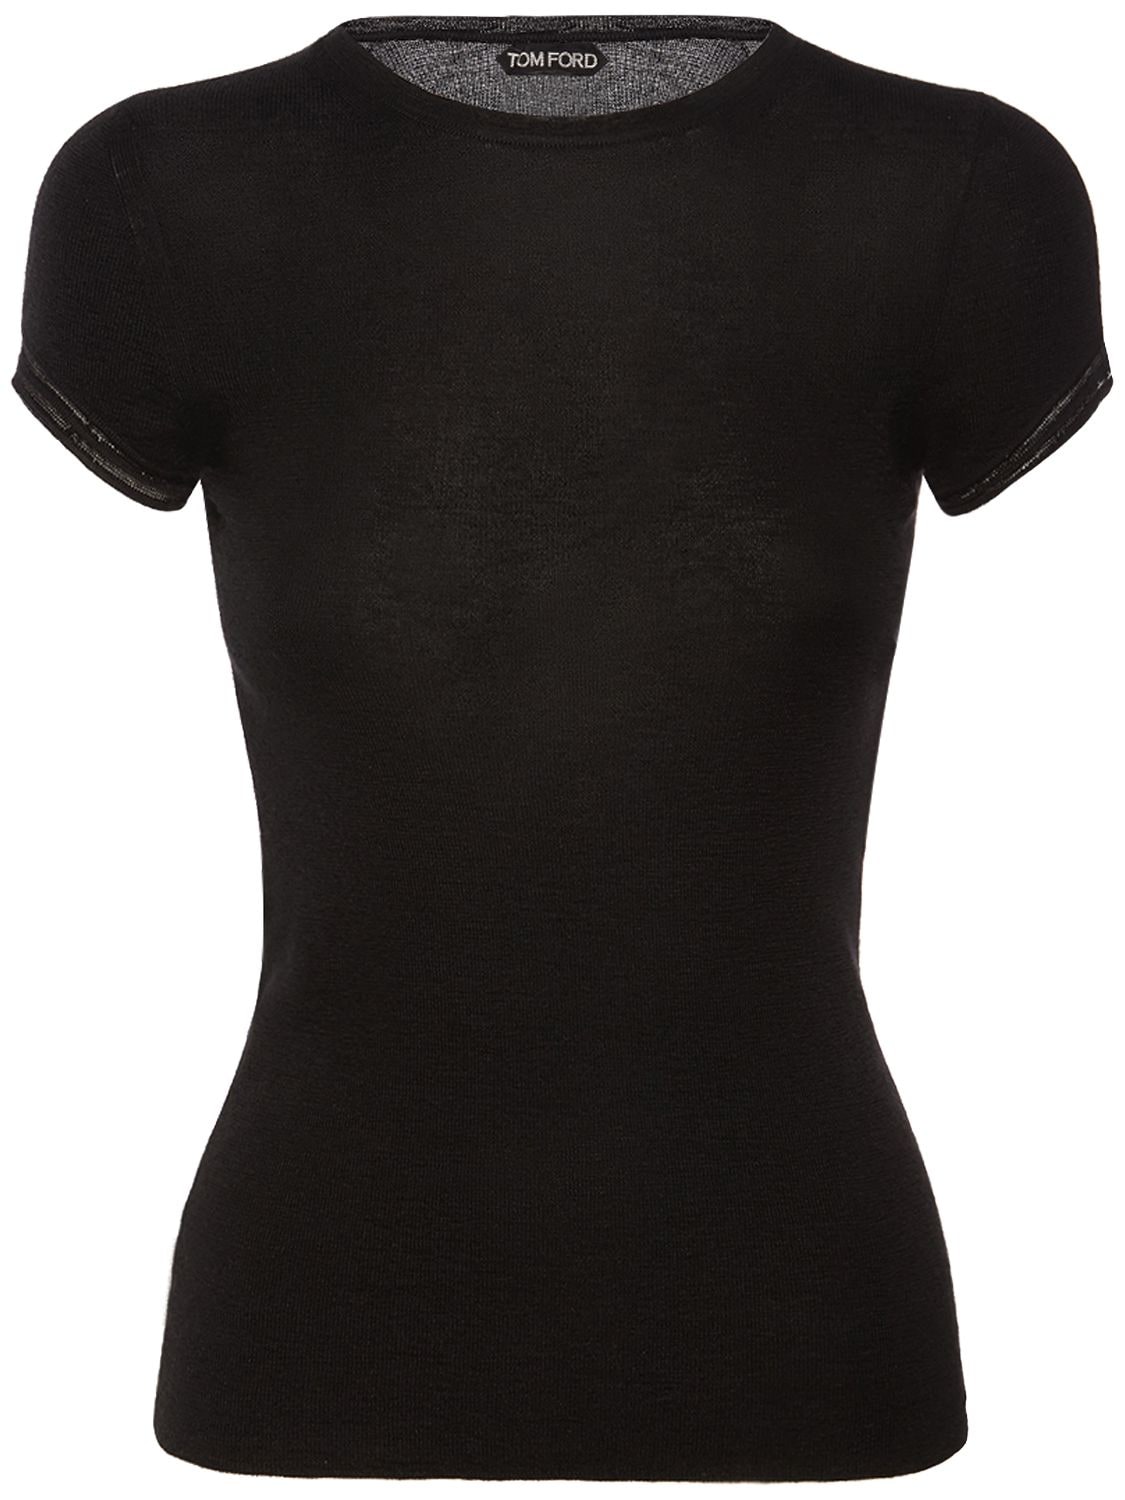 Tom Ford Cashmere & Silk Knit Short Sleeve Top In Black